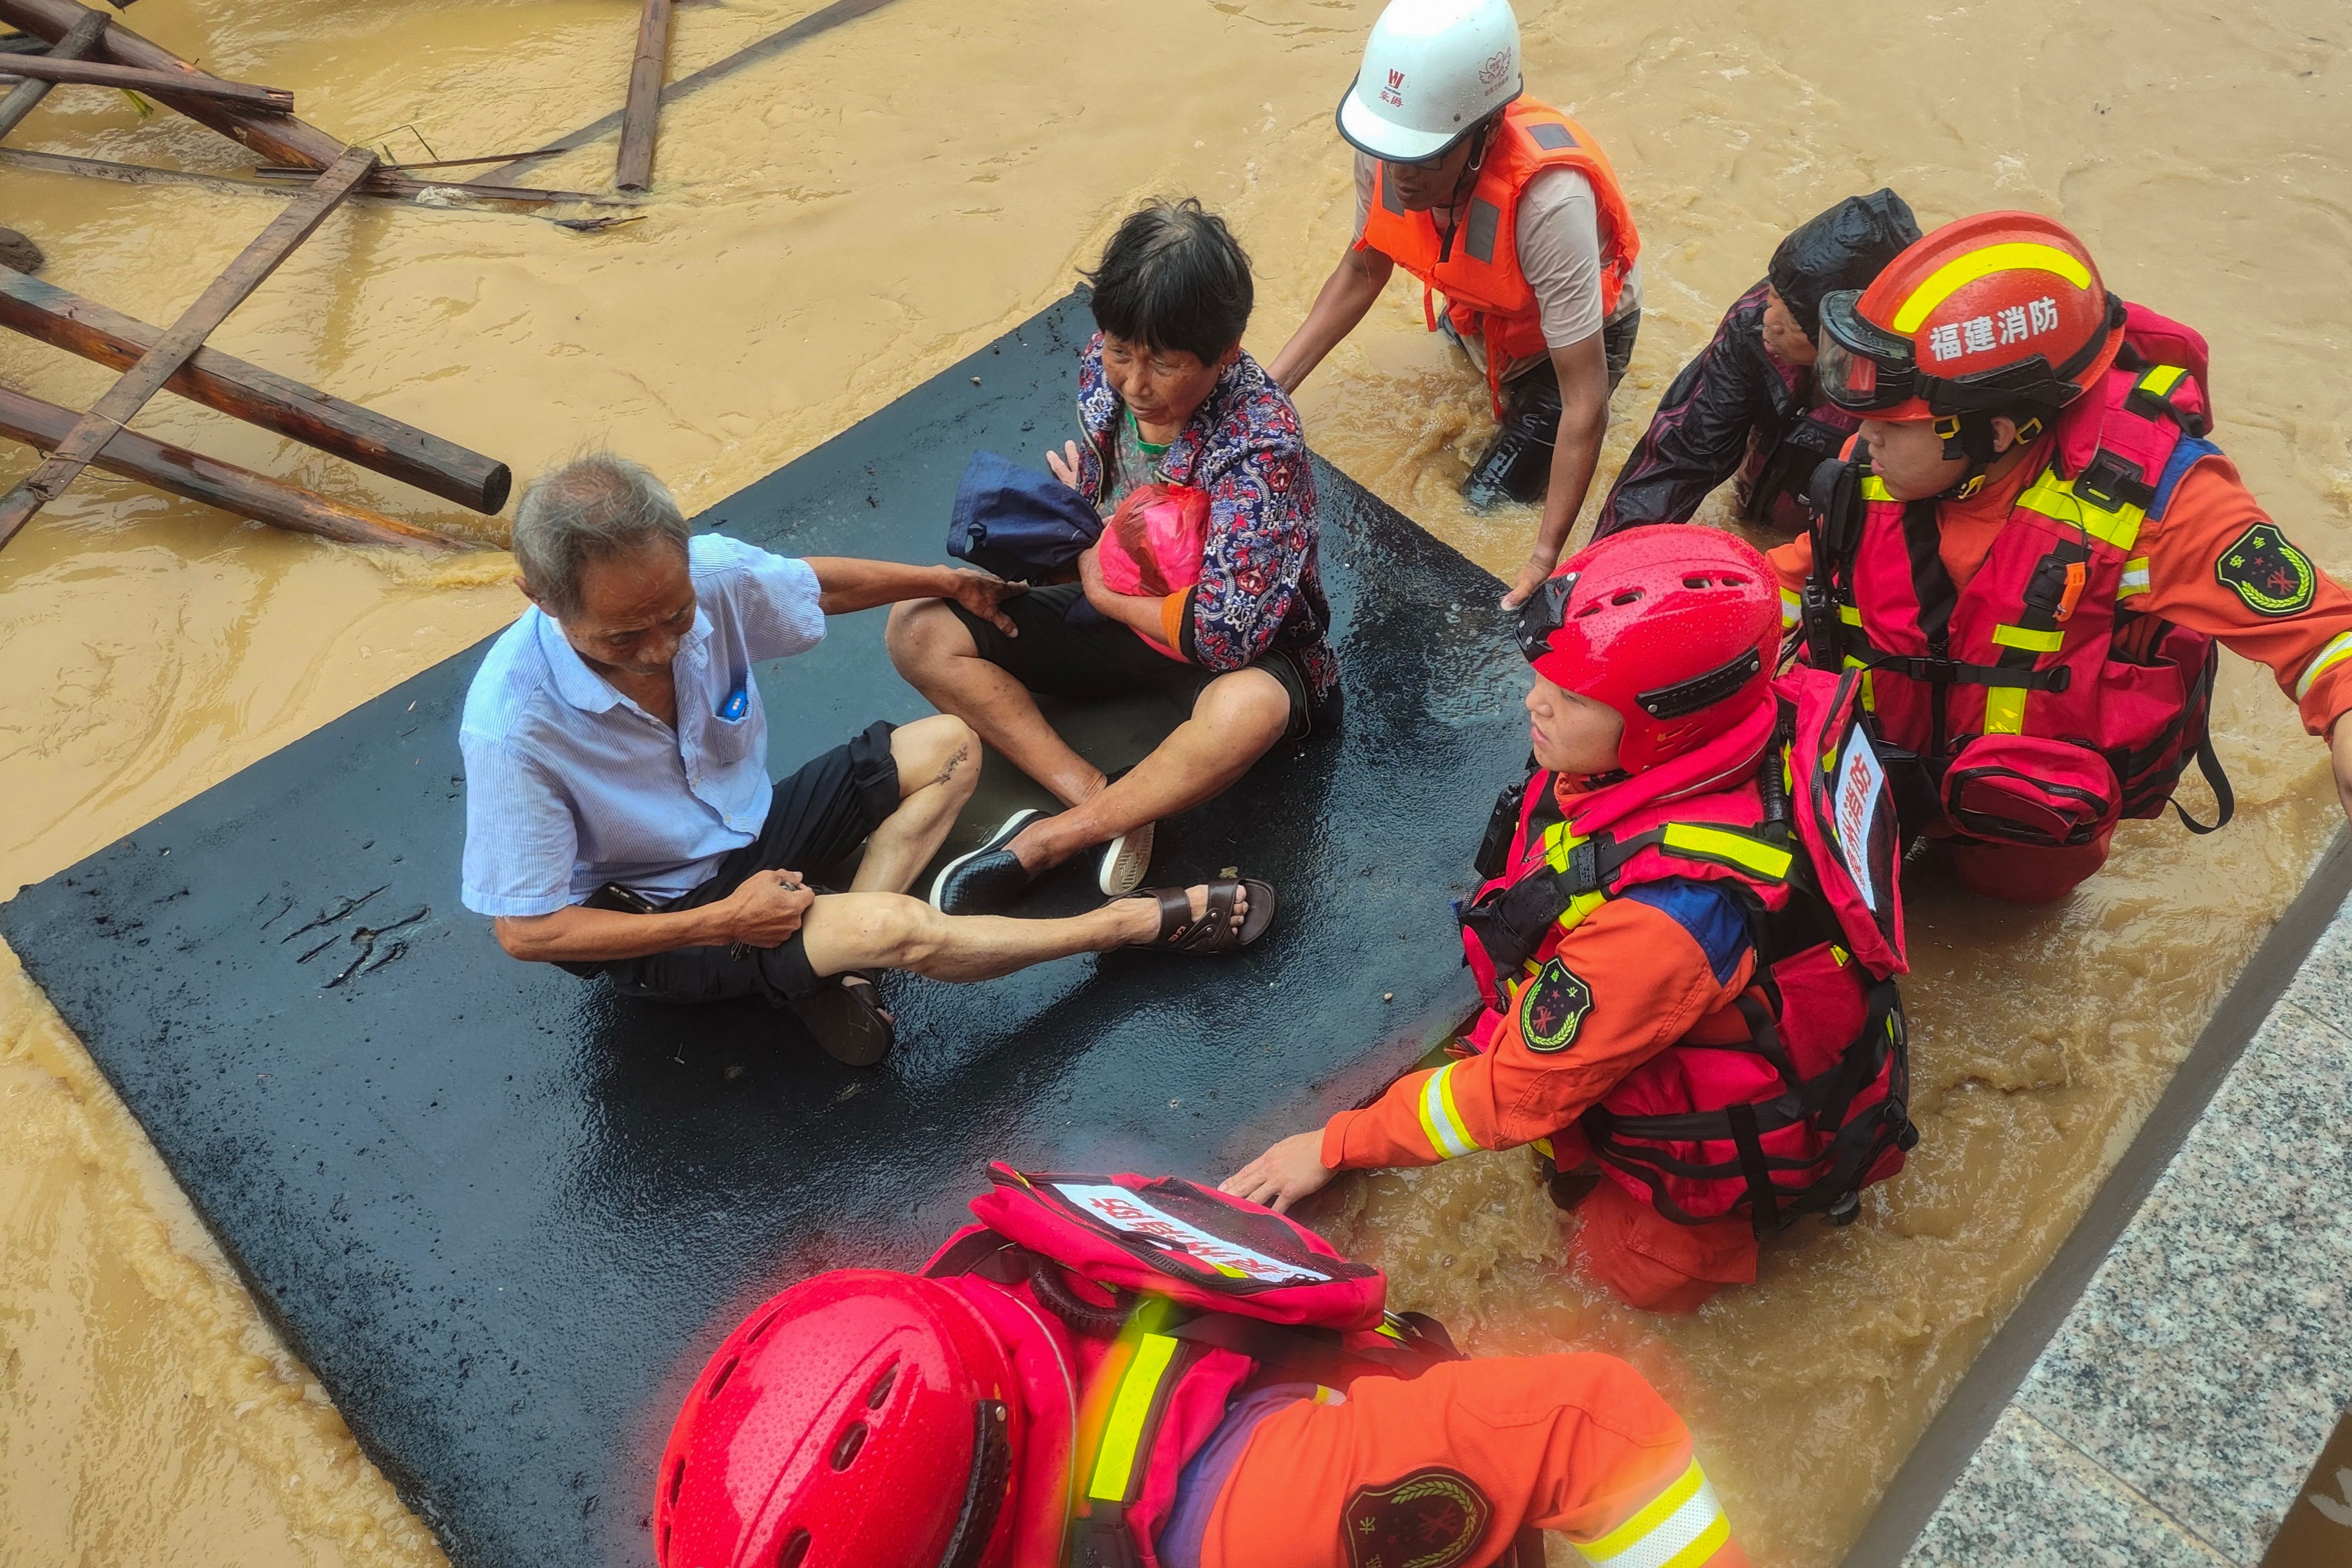 Rescuers evacuate residents in a flooded area after Typhoon Doksuri’s landfall in Quanzhou, in China’s eastern Fujian province